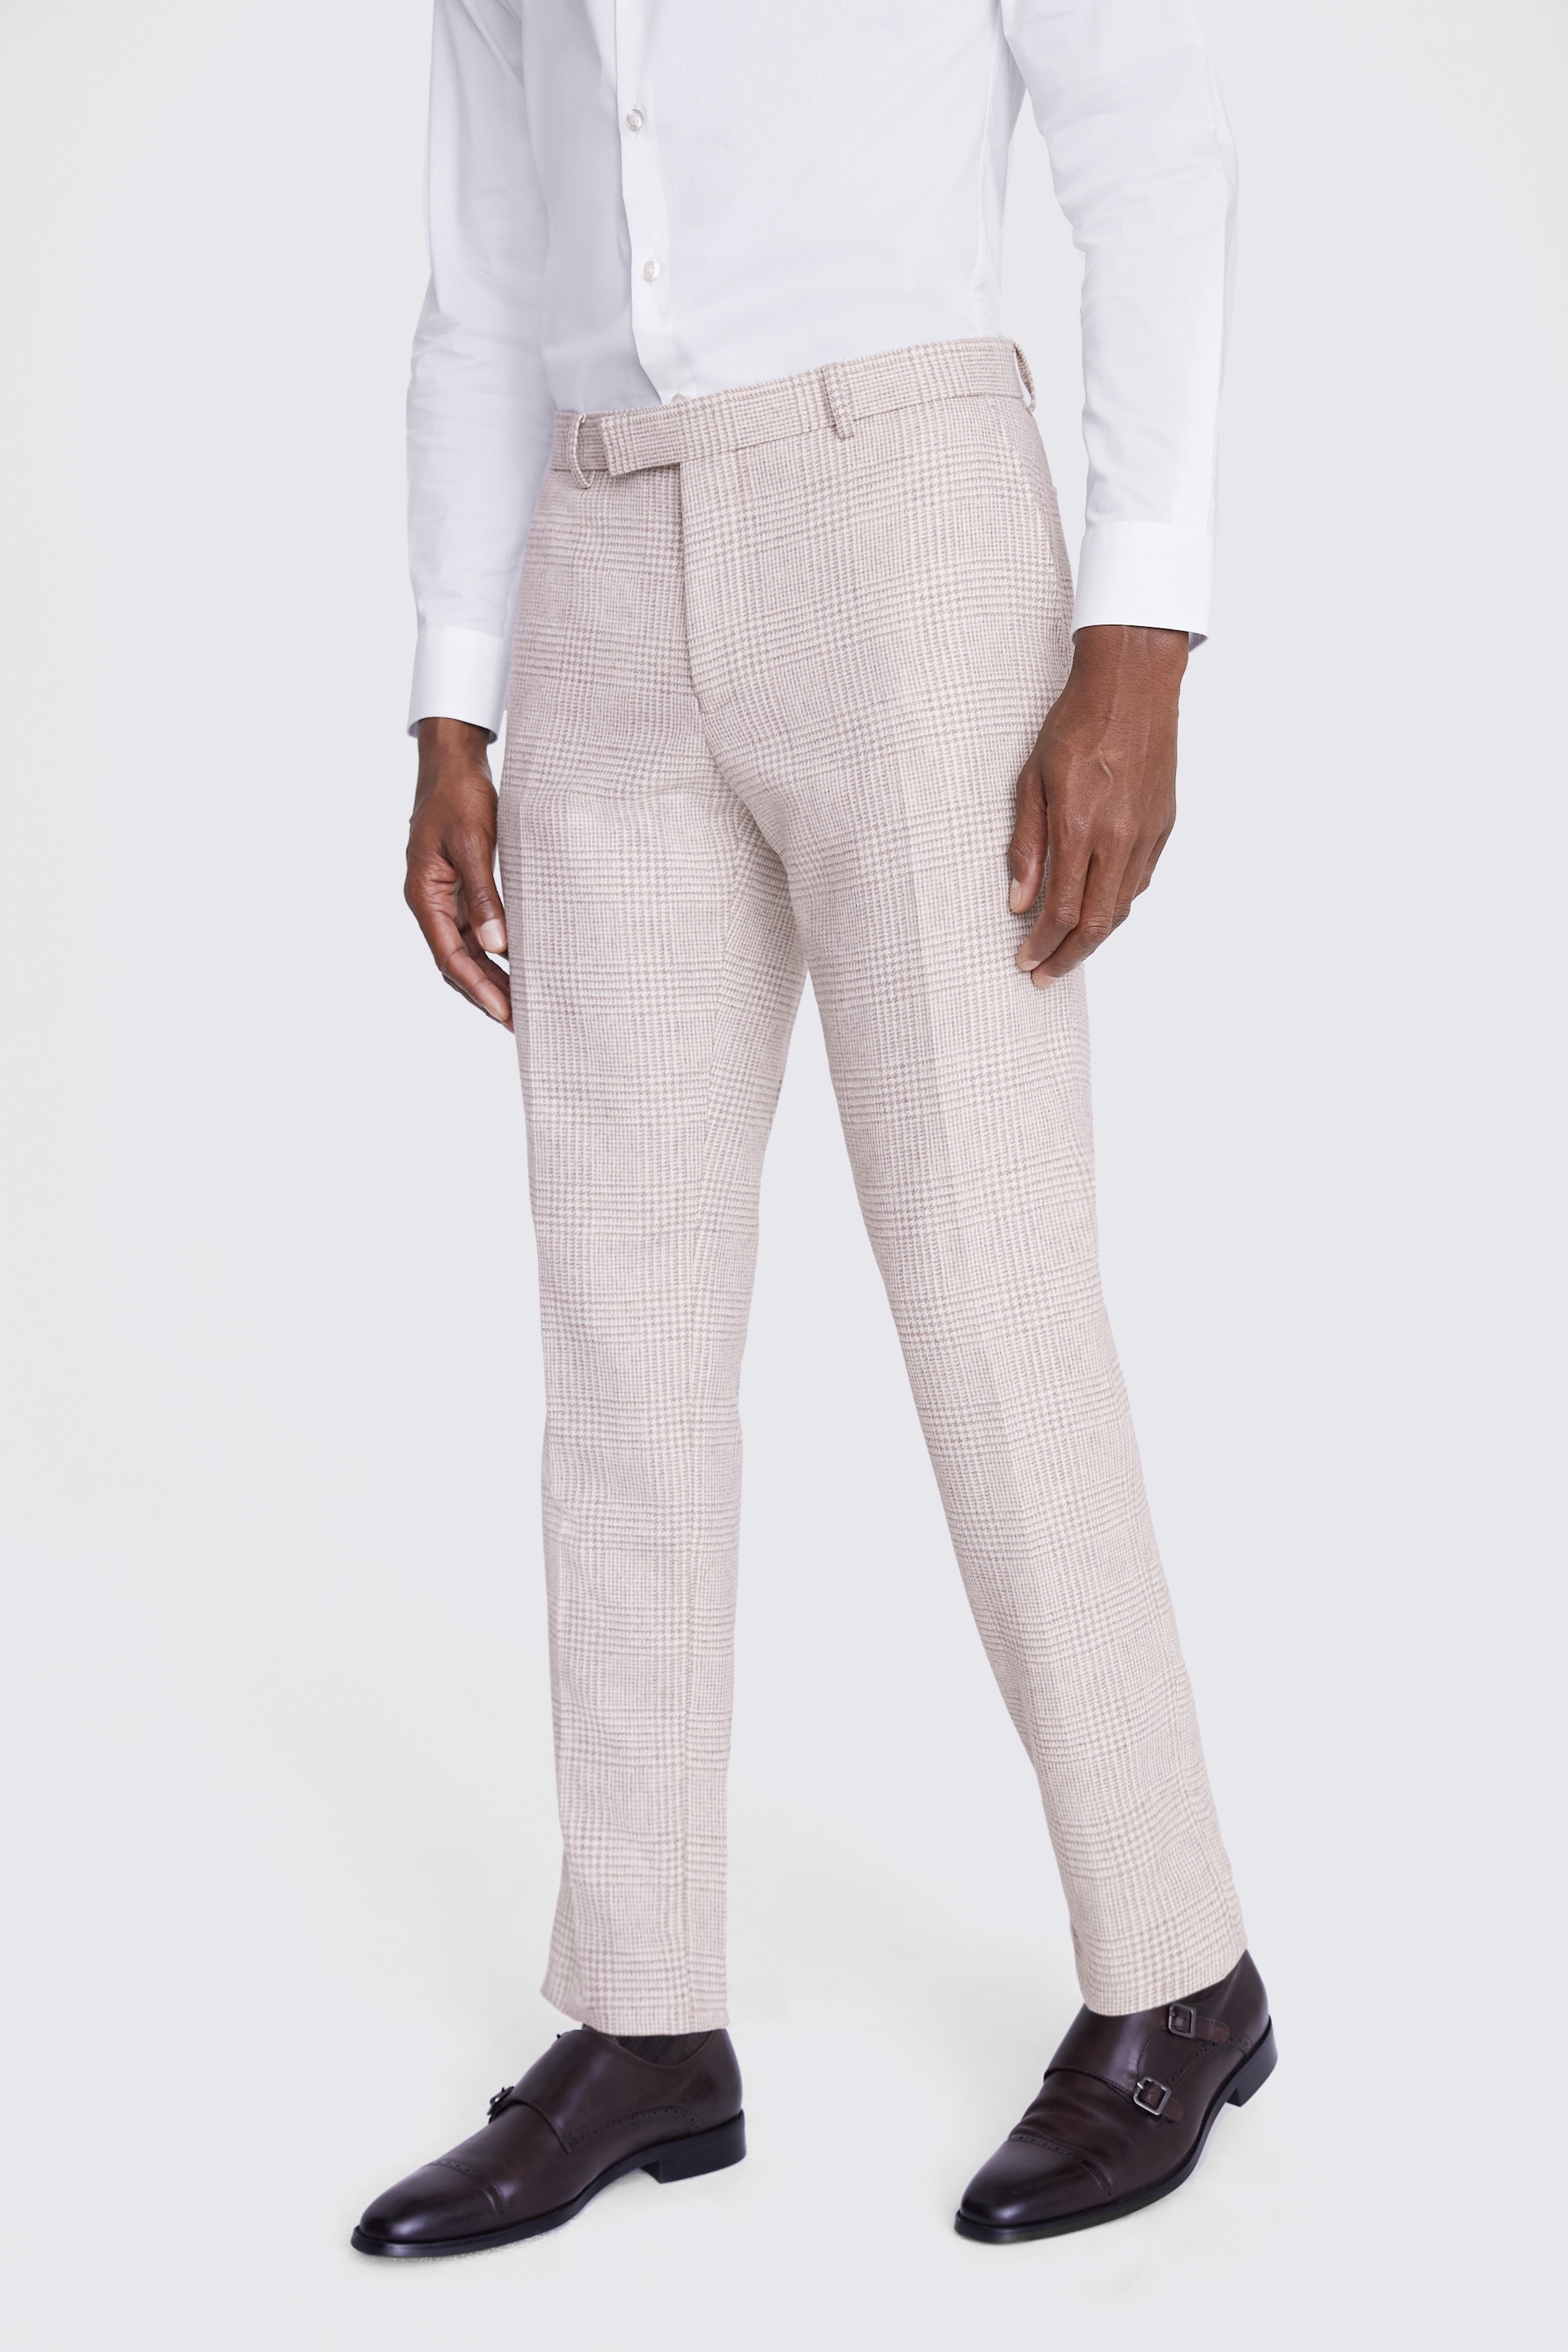 Off White Check Trousers | Buy Online at Moss